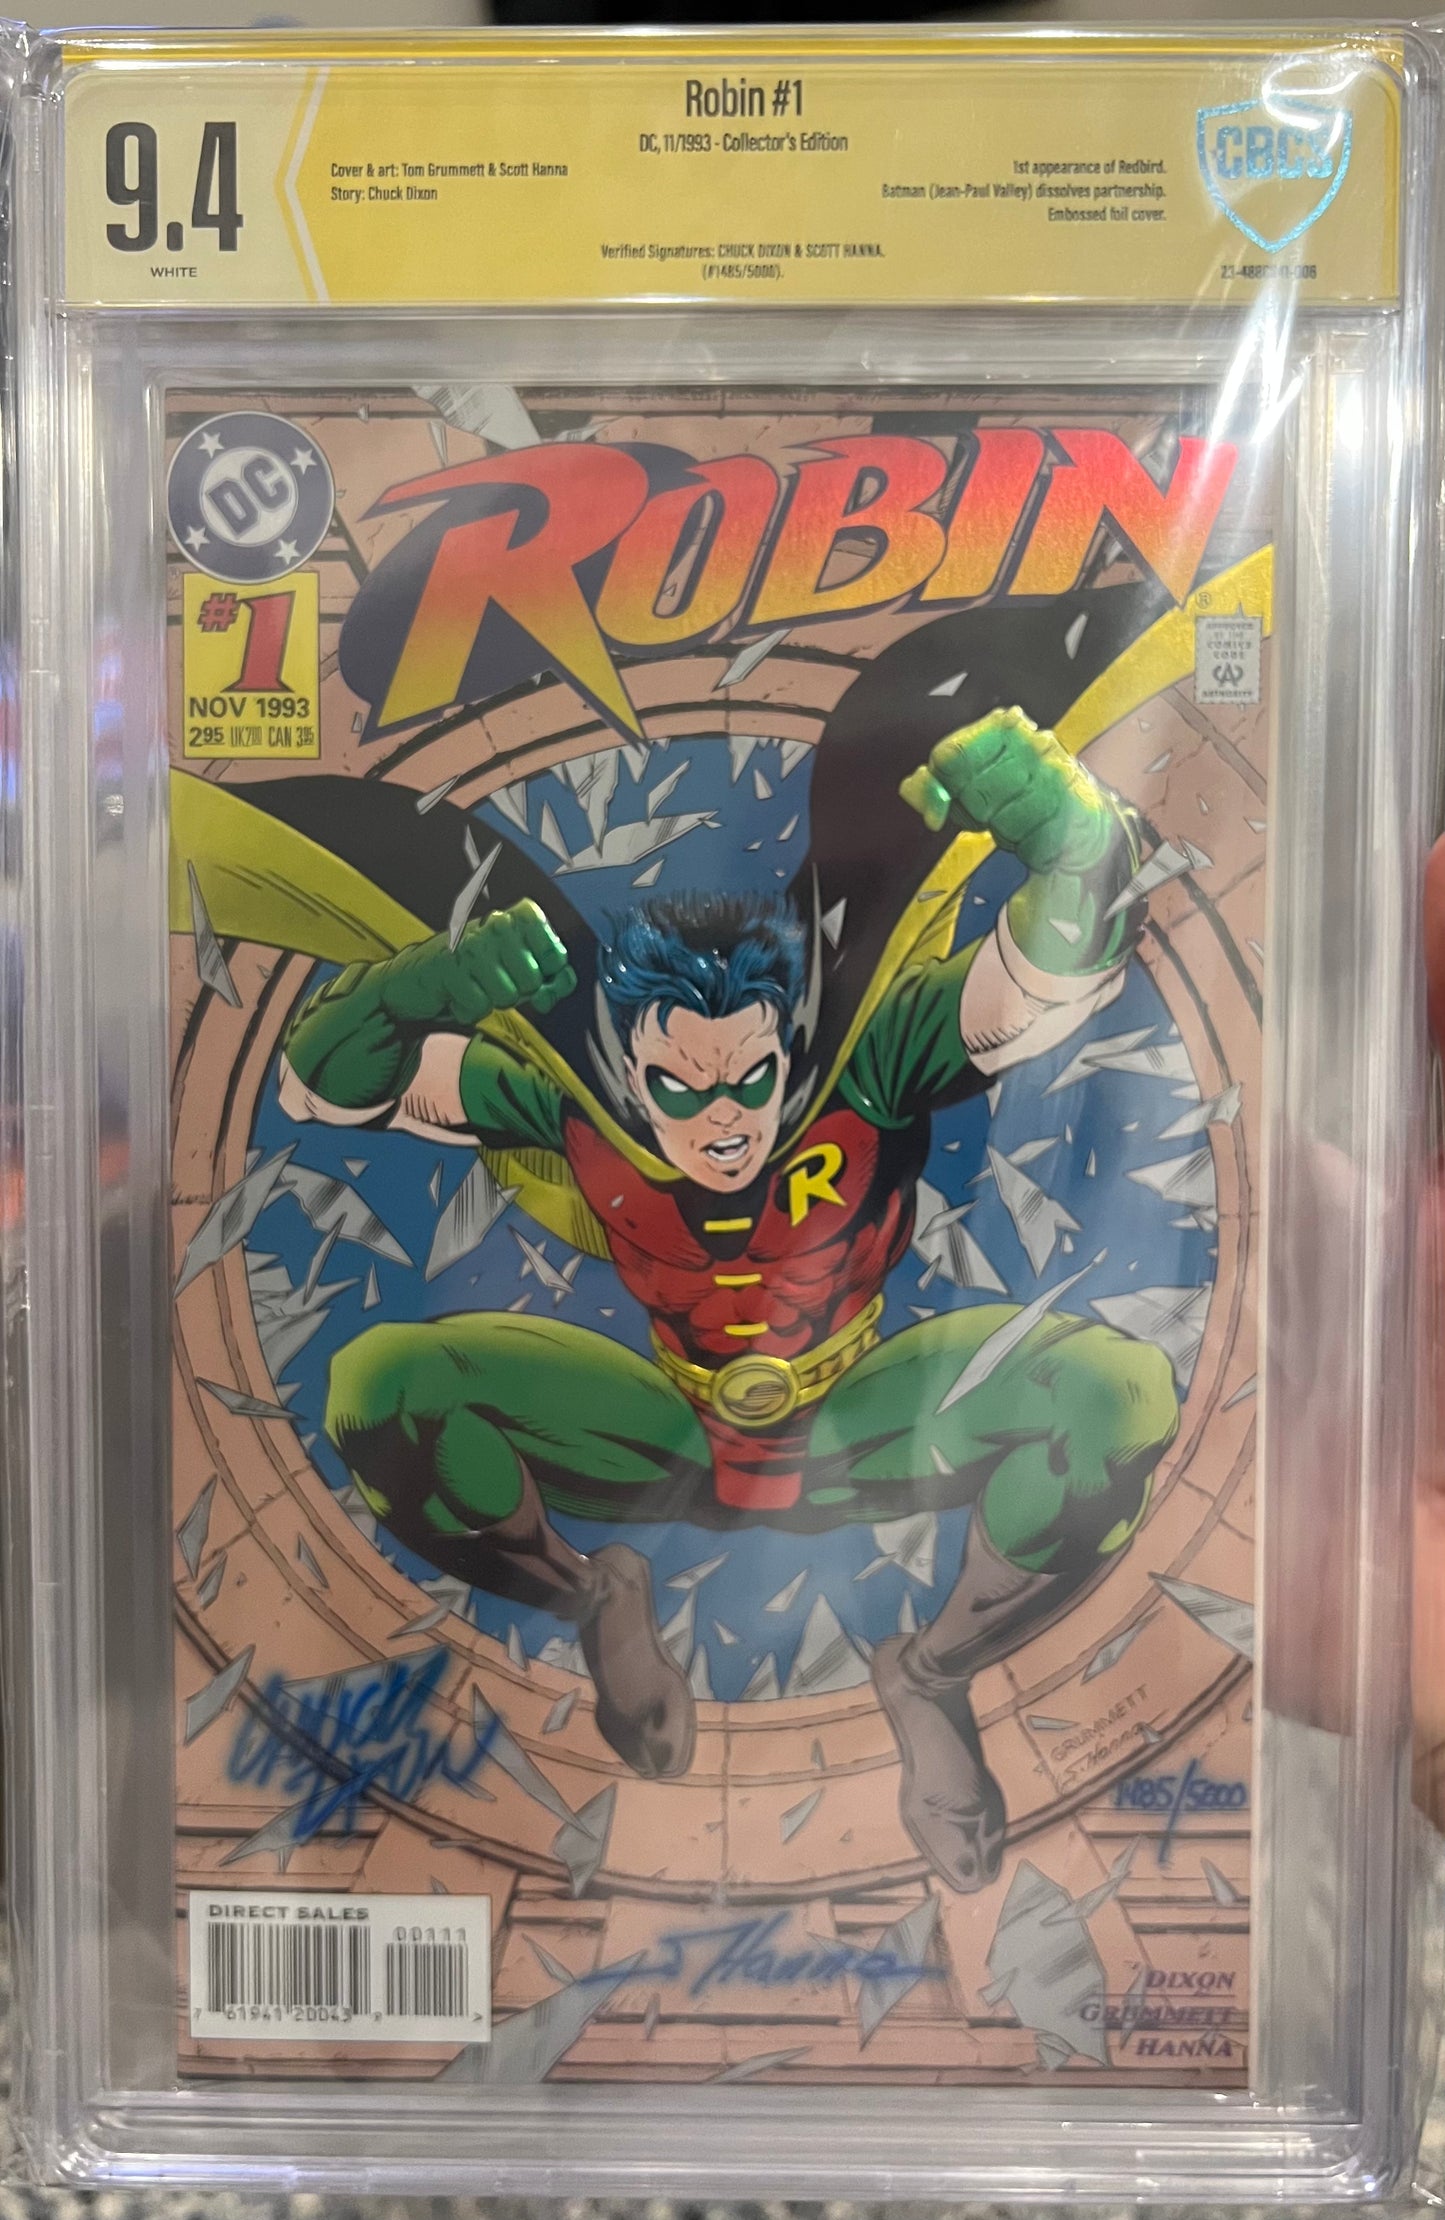 Robin #1 CBCS 9.4 (DC, 1993) Verified Signature from Chuck Dixon & Scott Hanna (Collector’s Edition, Embossed Cover)